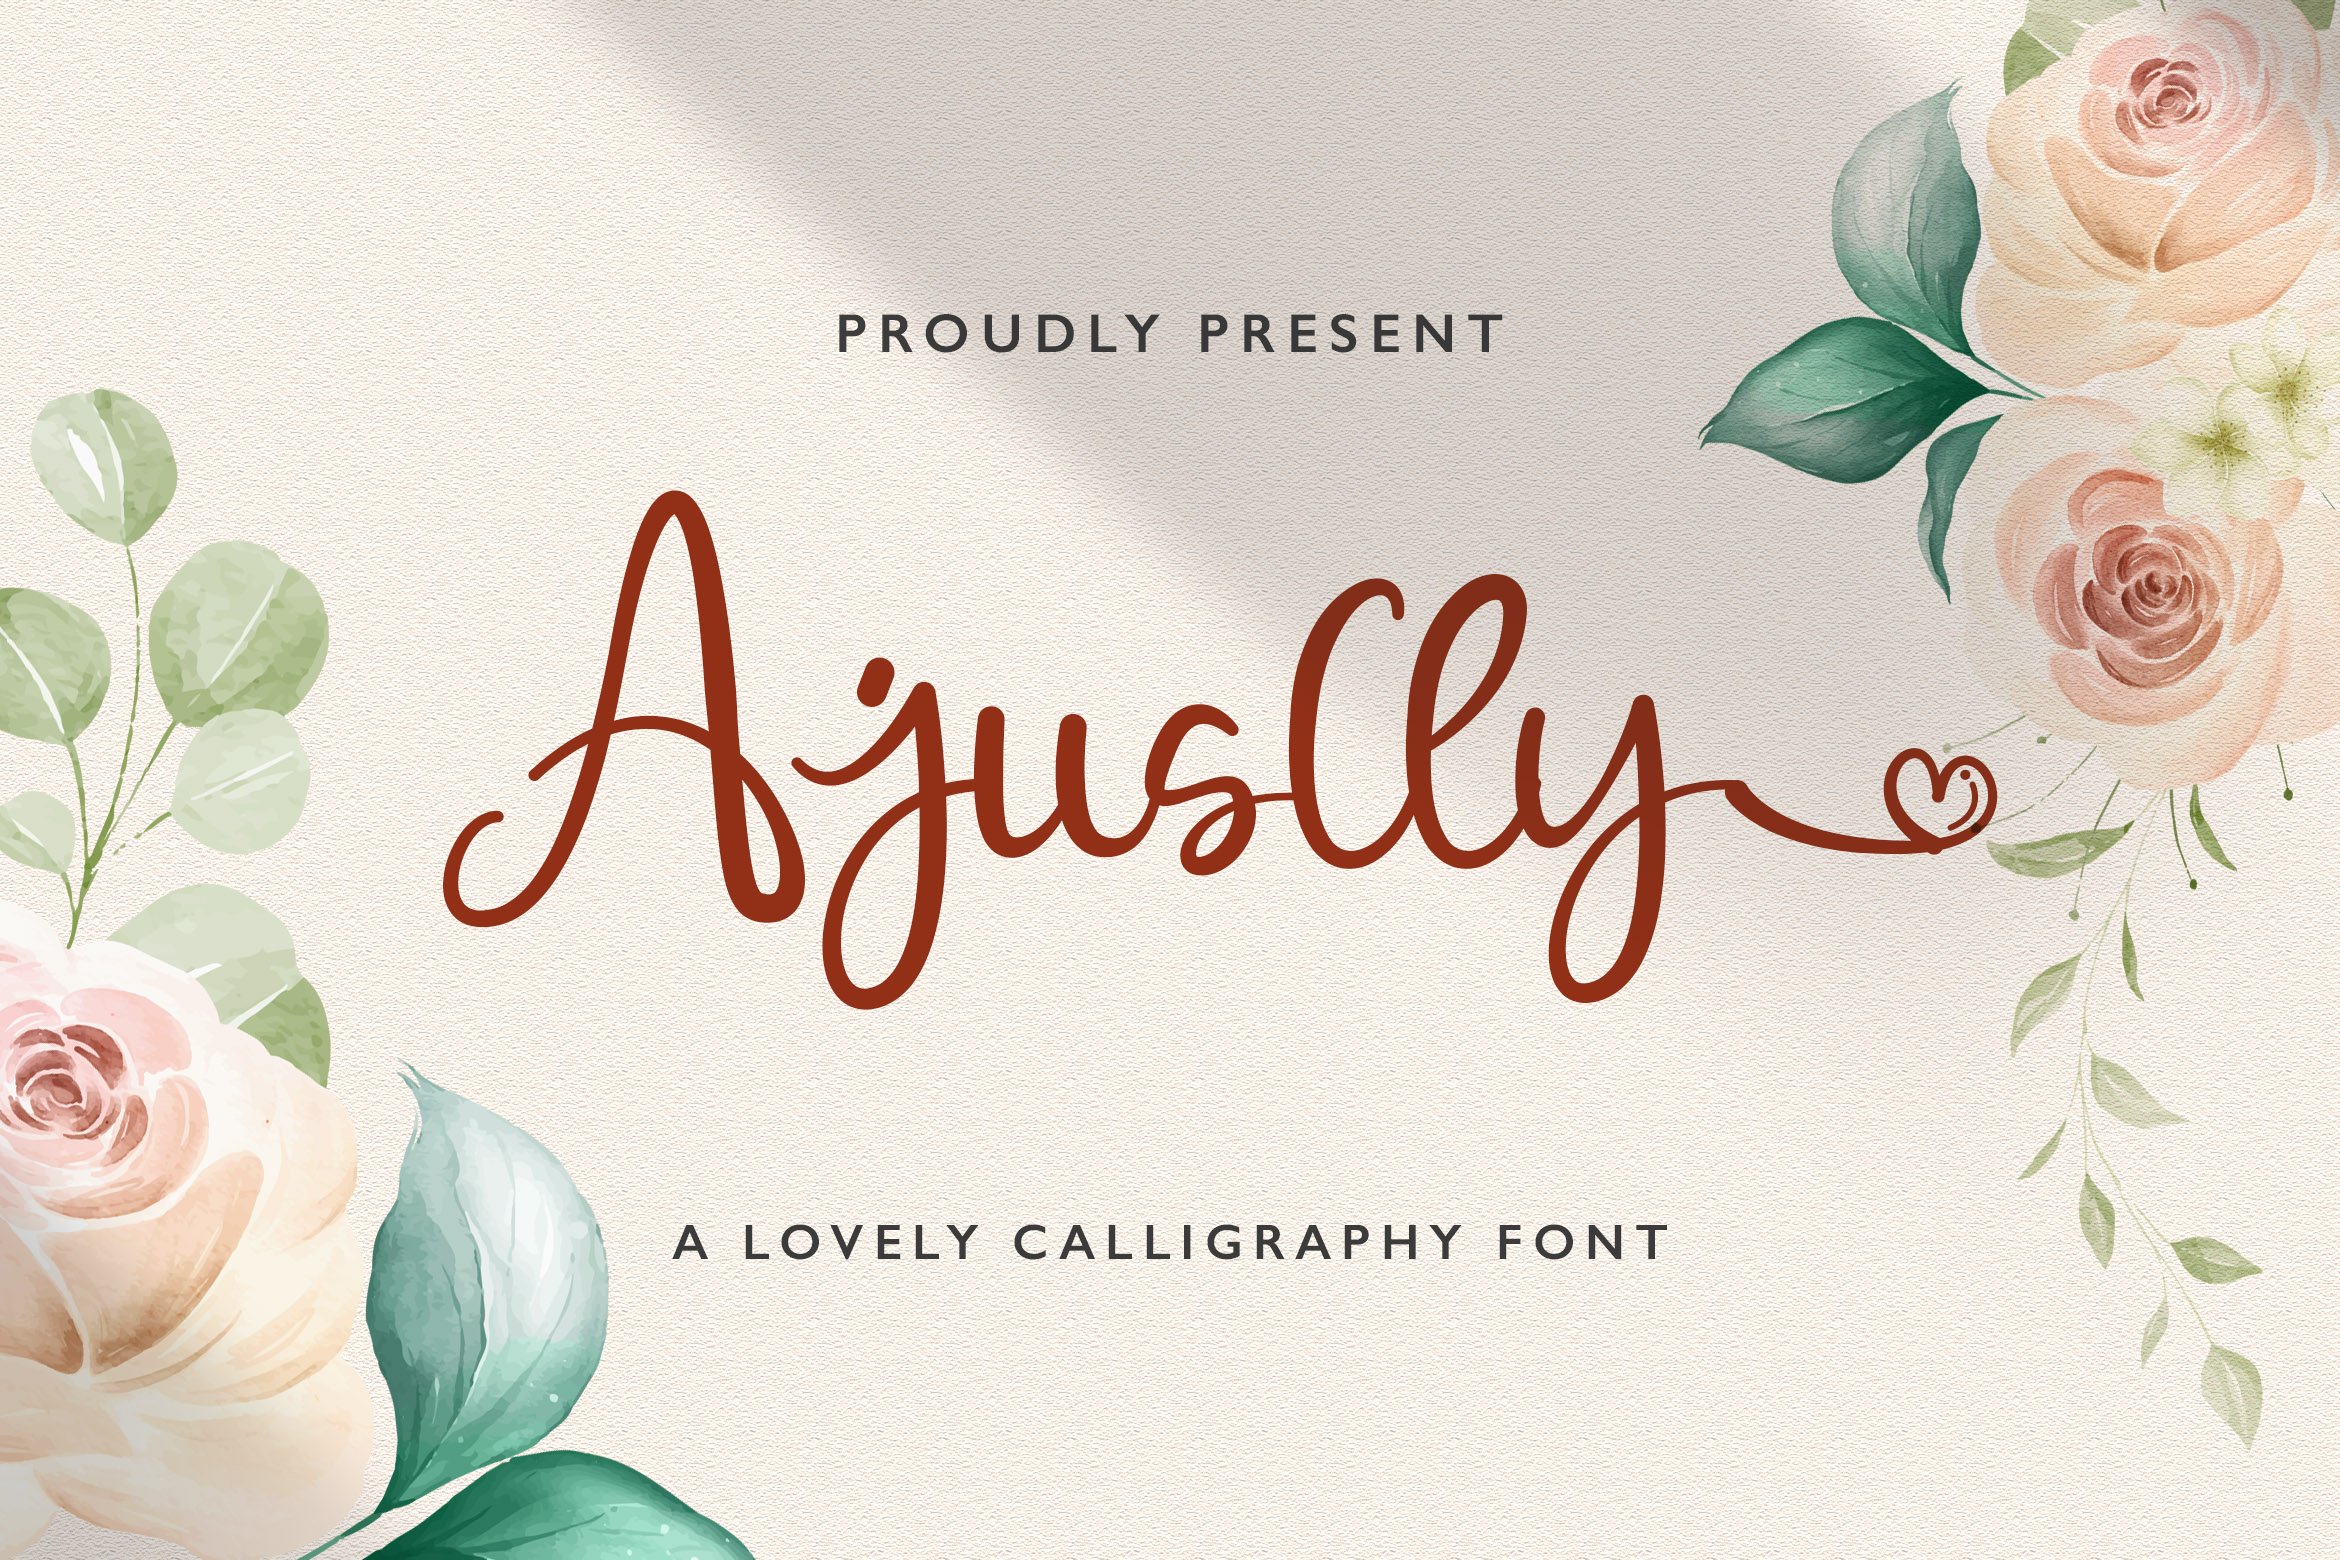 Ajuslly - Modern Calligraphy Font cover image.